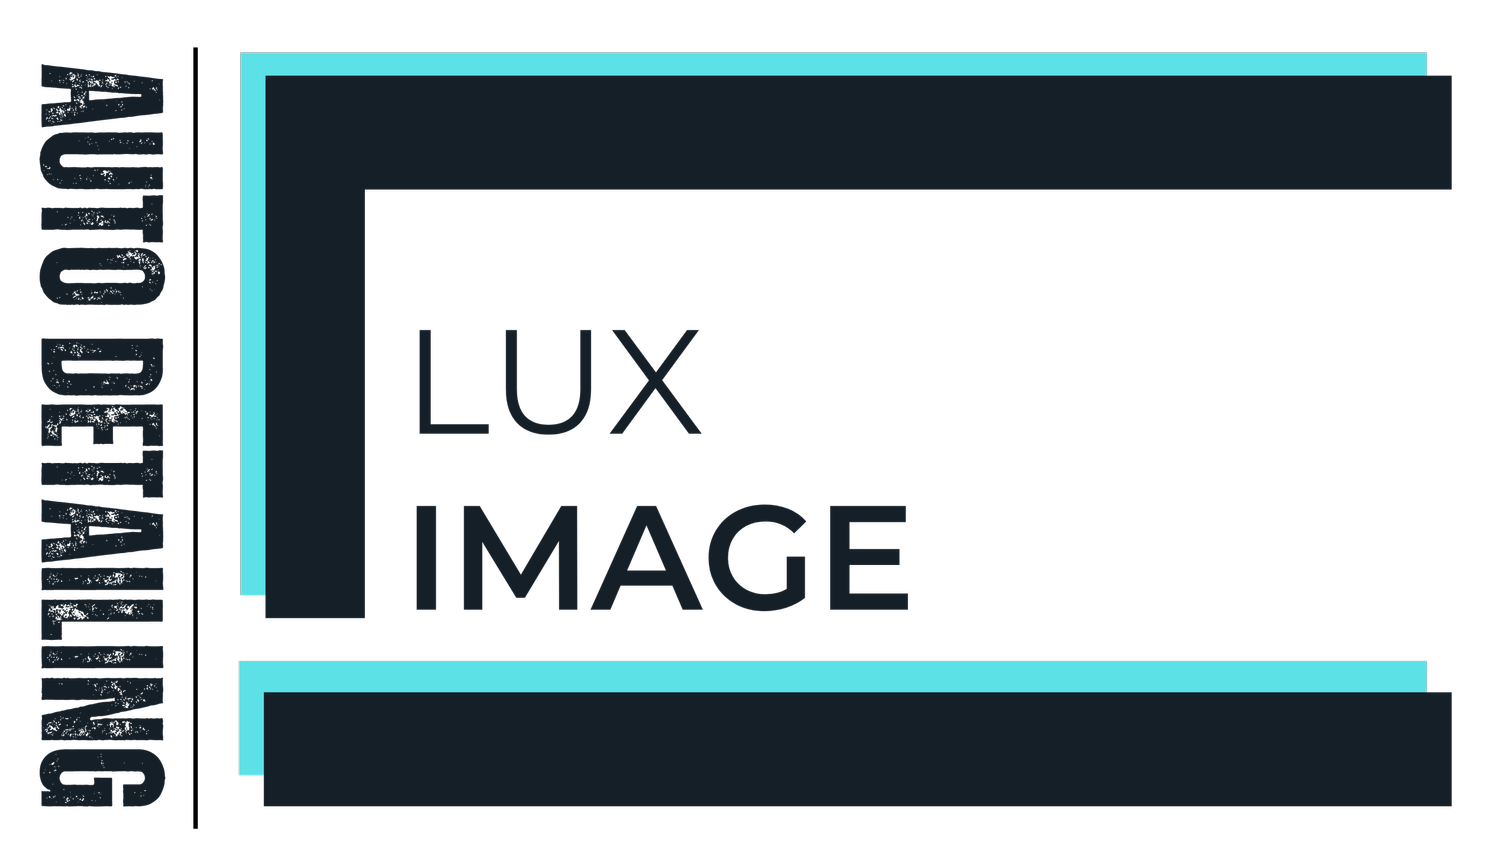 Lux Image